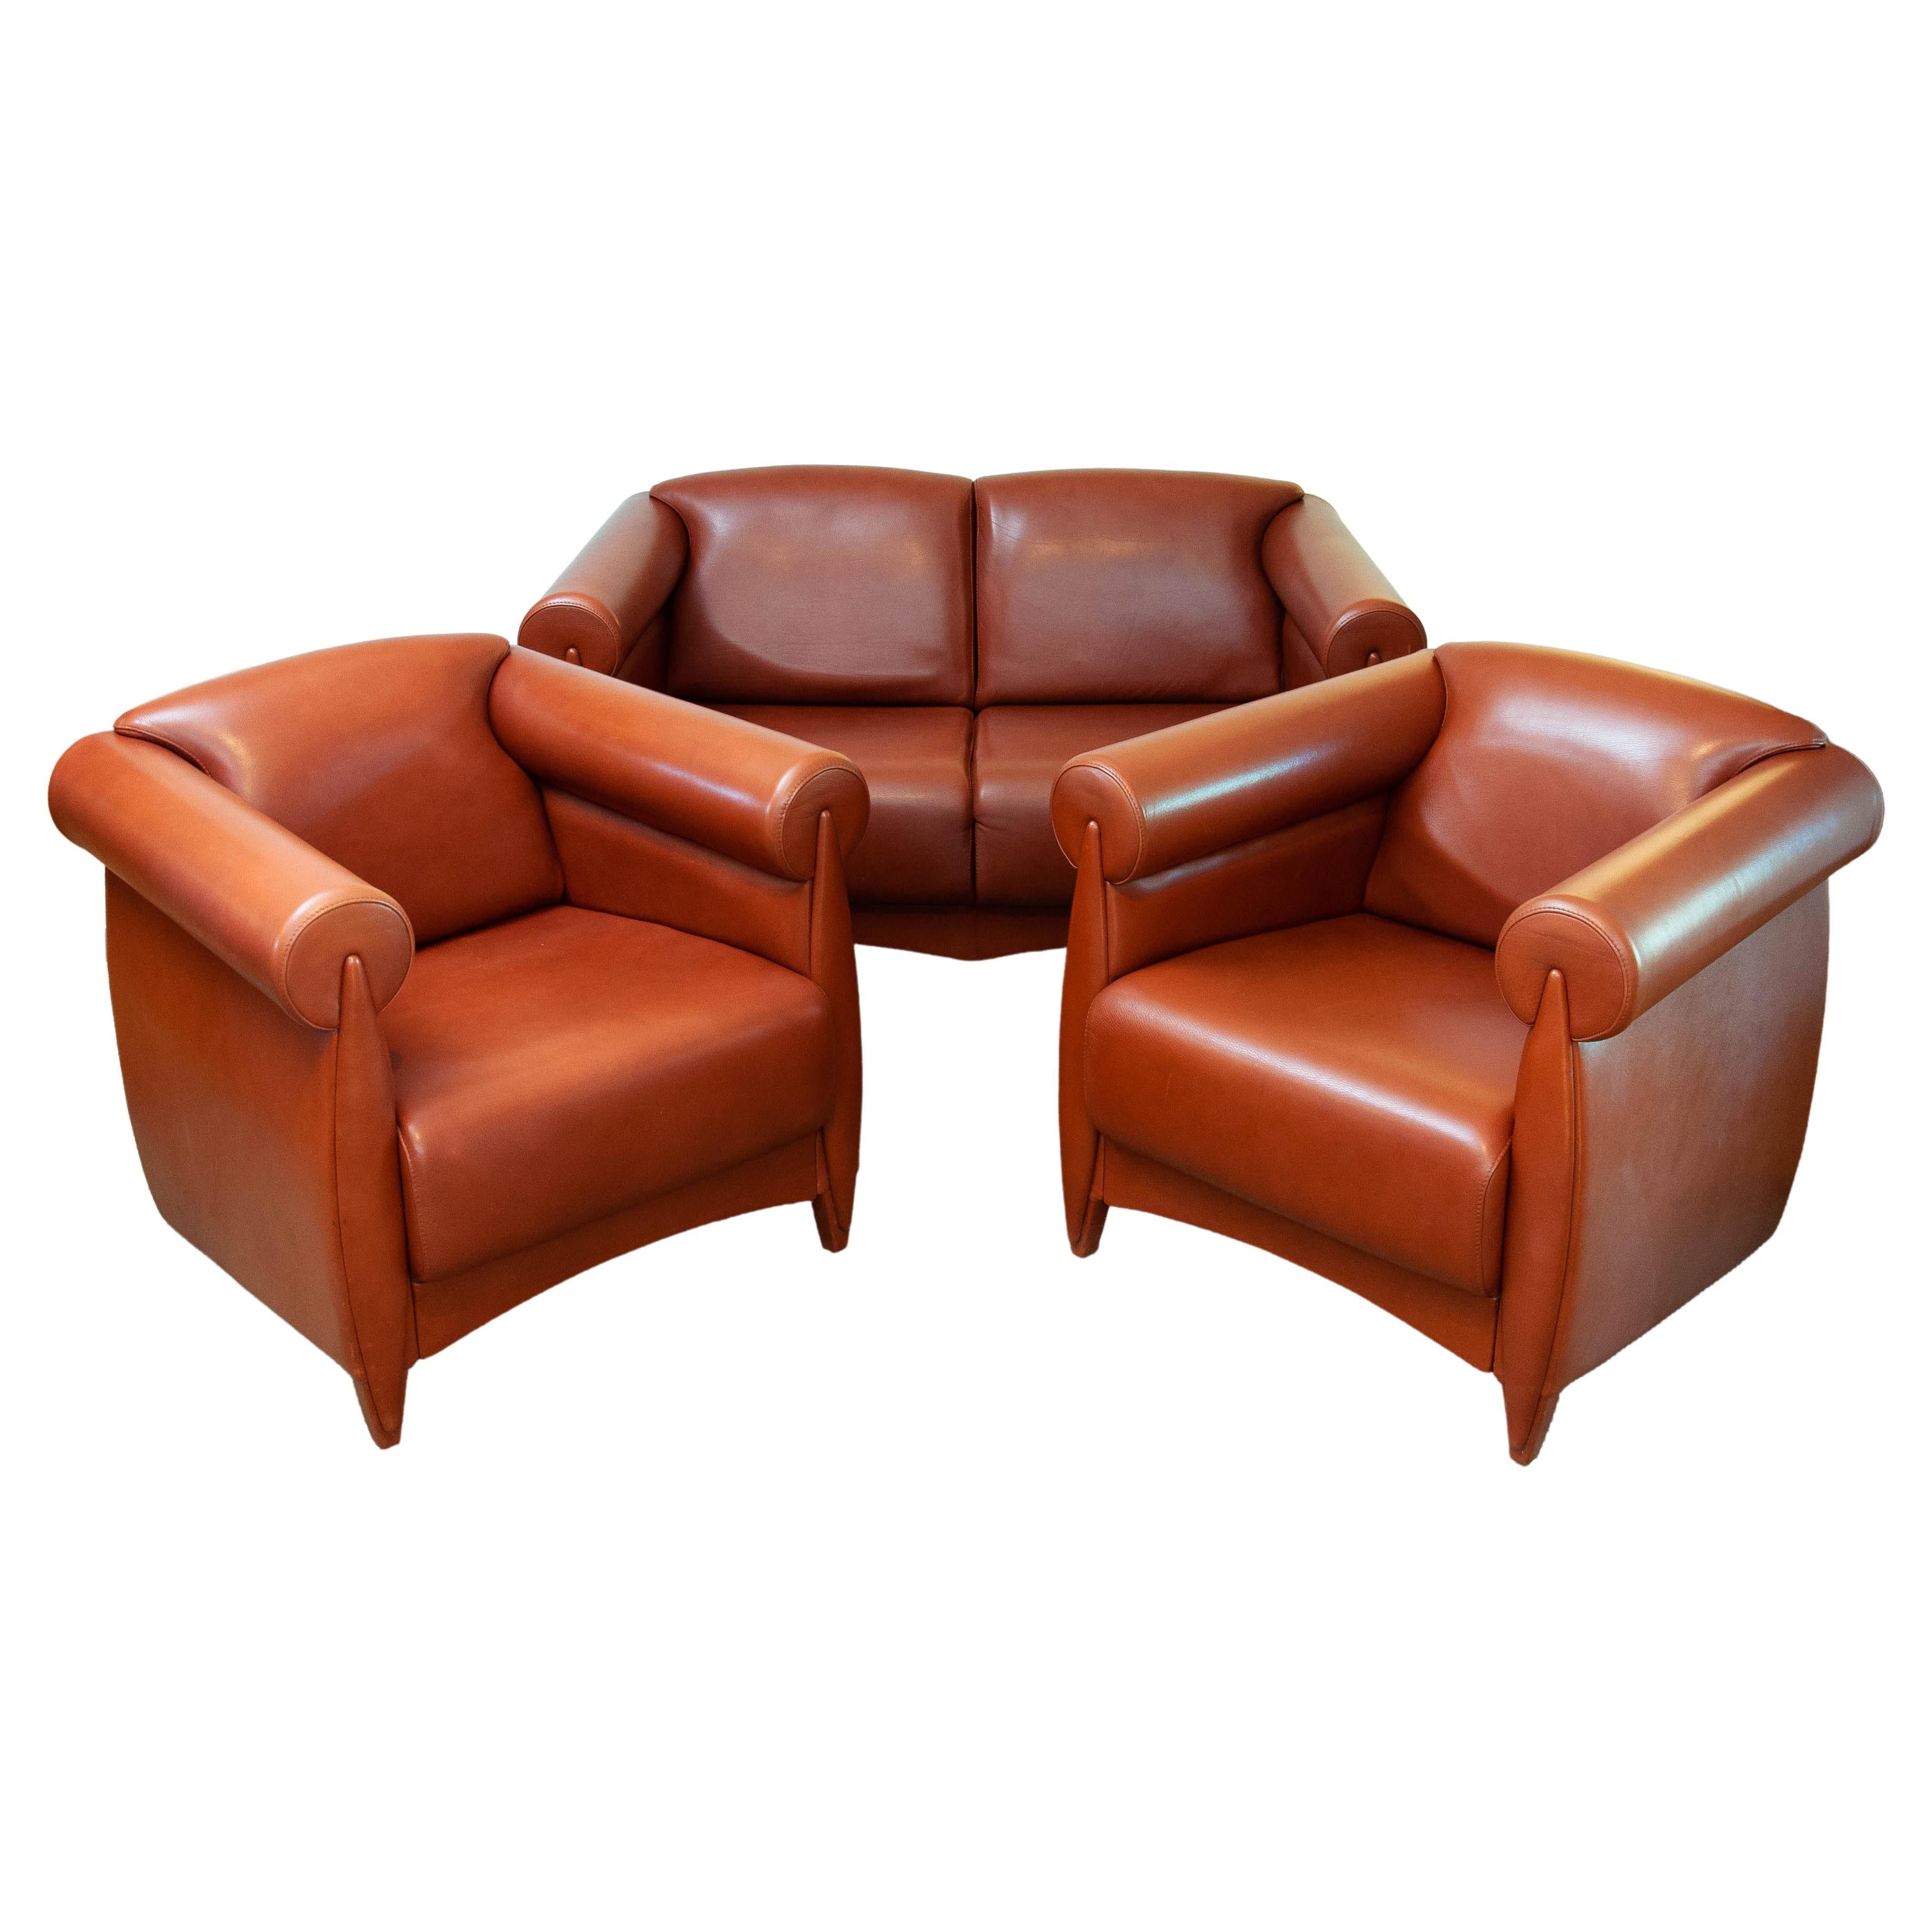 '80 Modern Art Deco Seating Group in Cognac Leather by Klaus Wettergren Denmark  For Sale